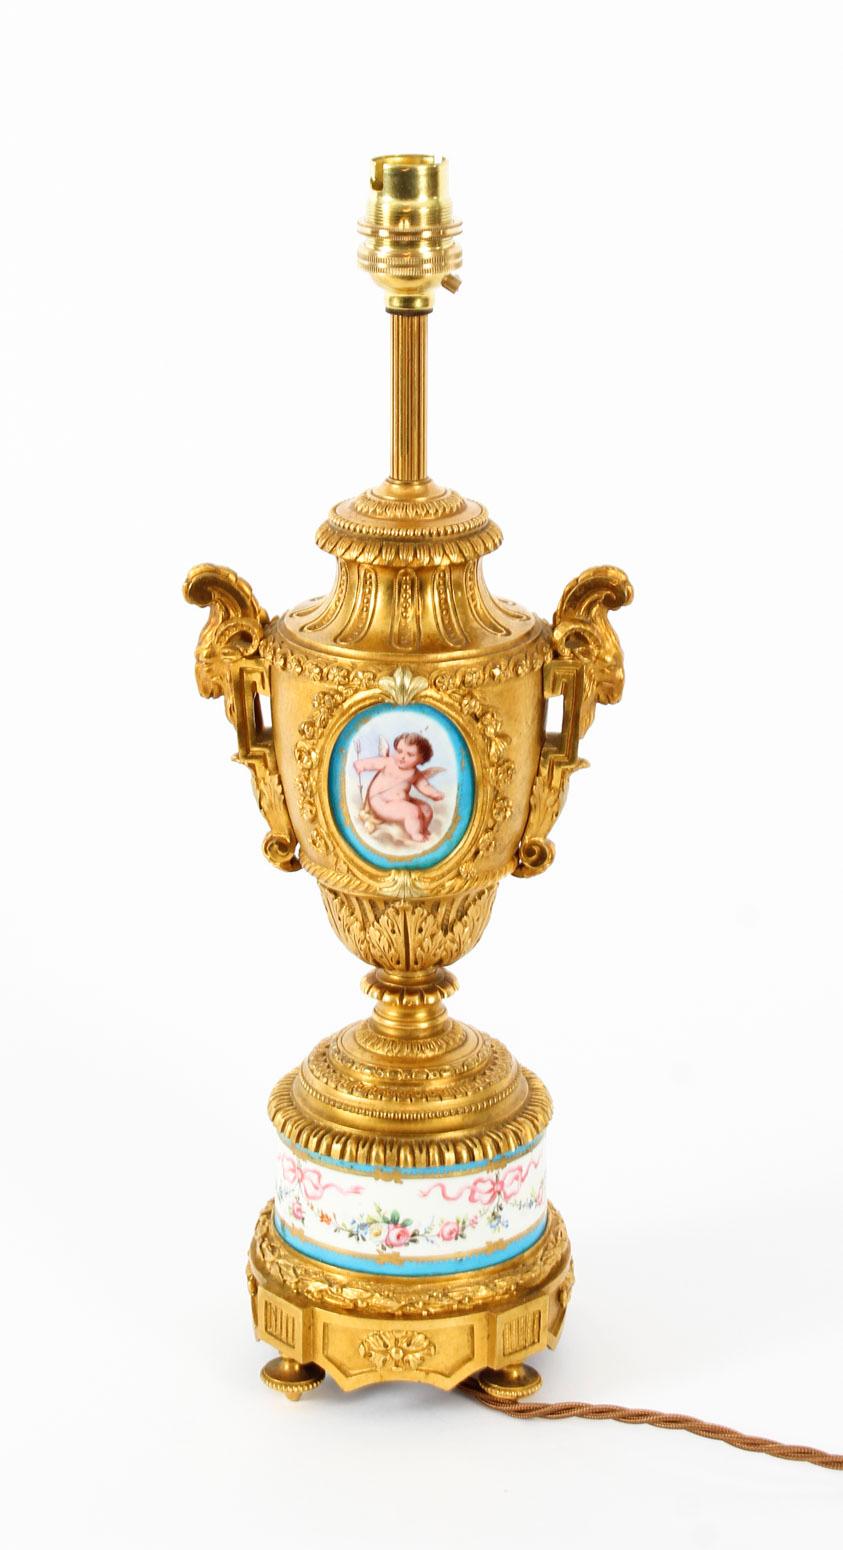 This is a magnificent French Sevres 